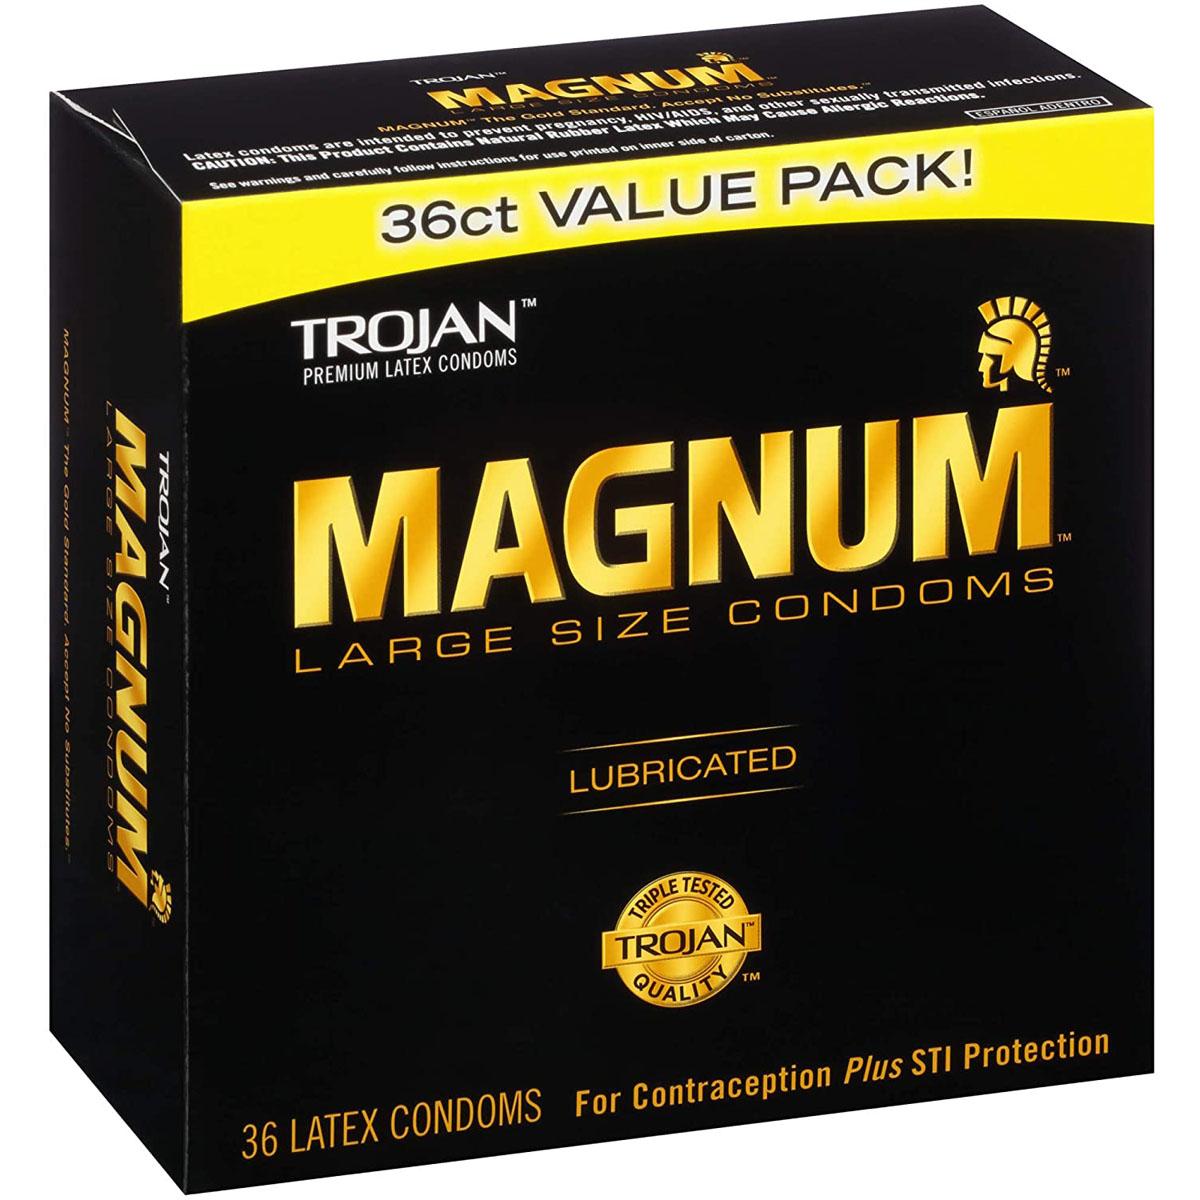 36 Trojan Magnum Large Size Lubricated Condoms for $8.54 Shipped